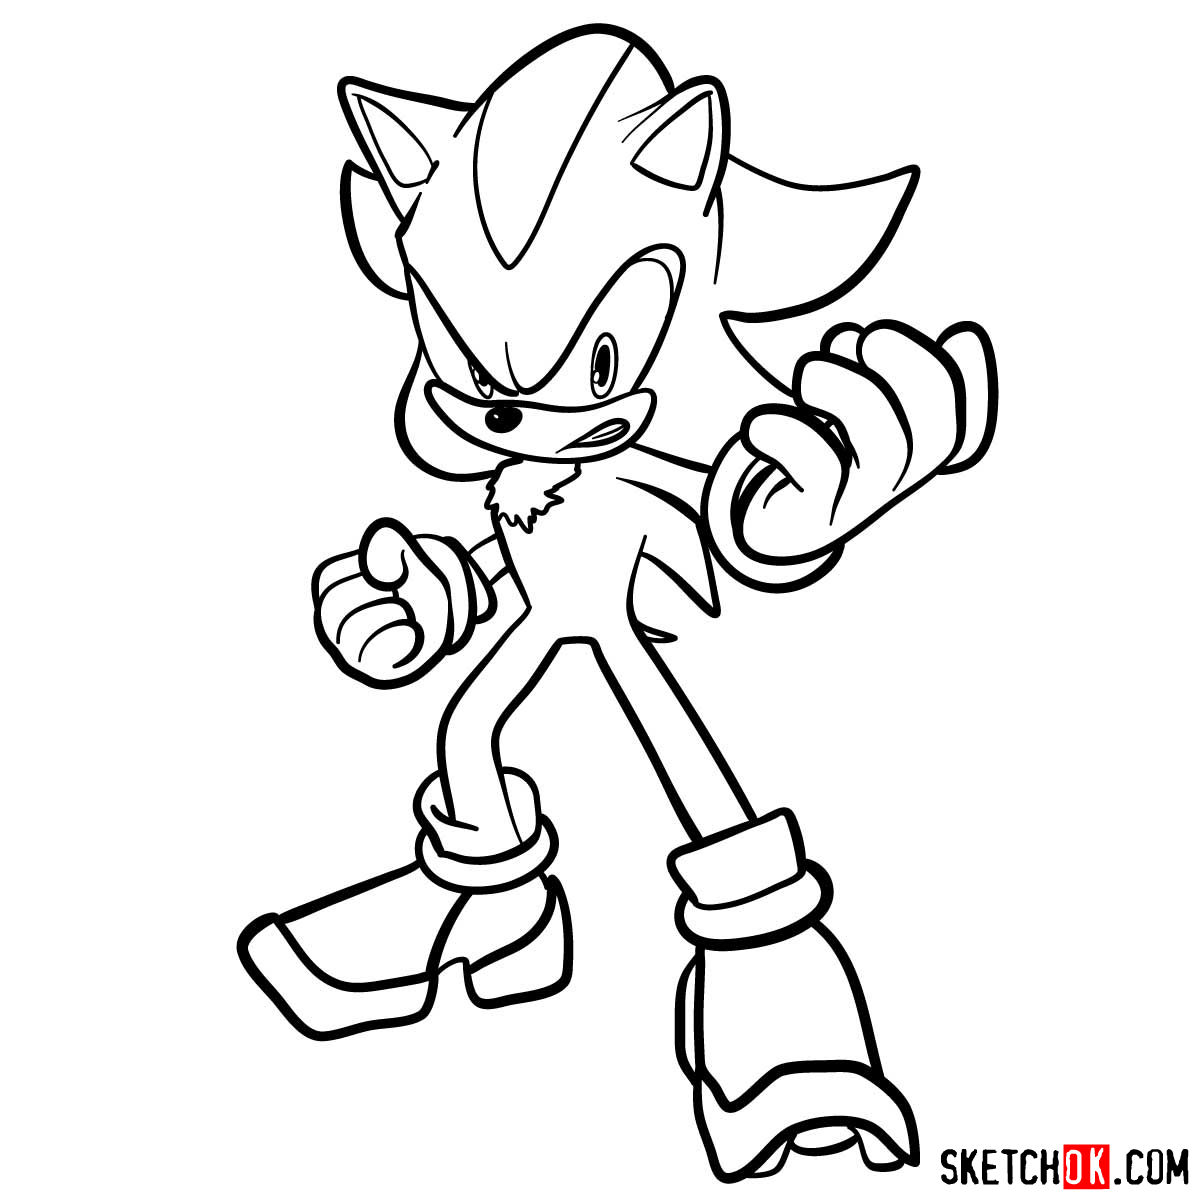 How to draw angry Shadow the Hedgehog